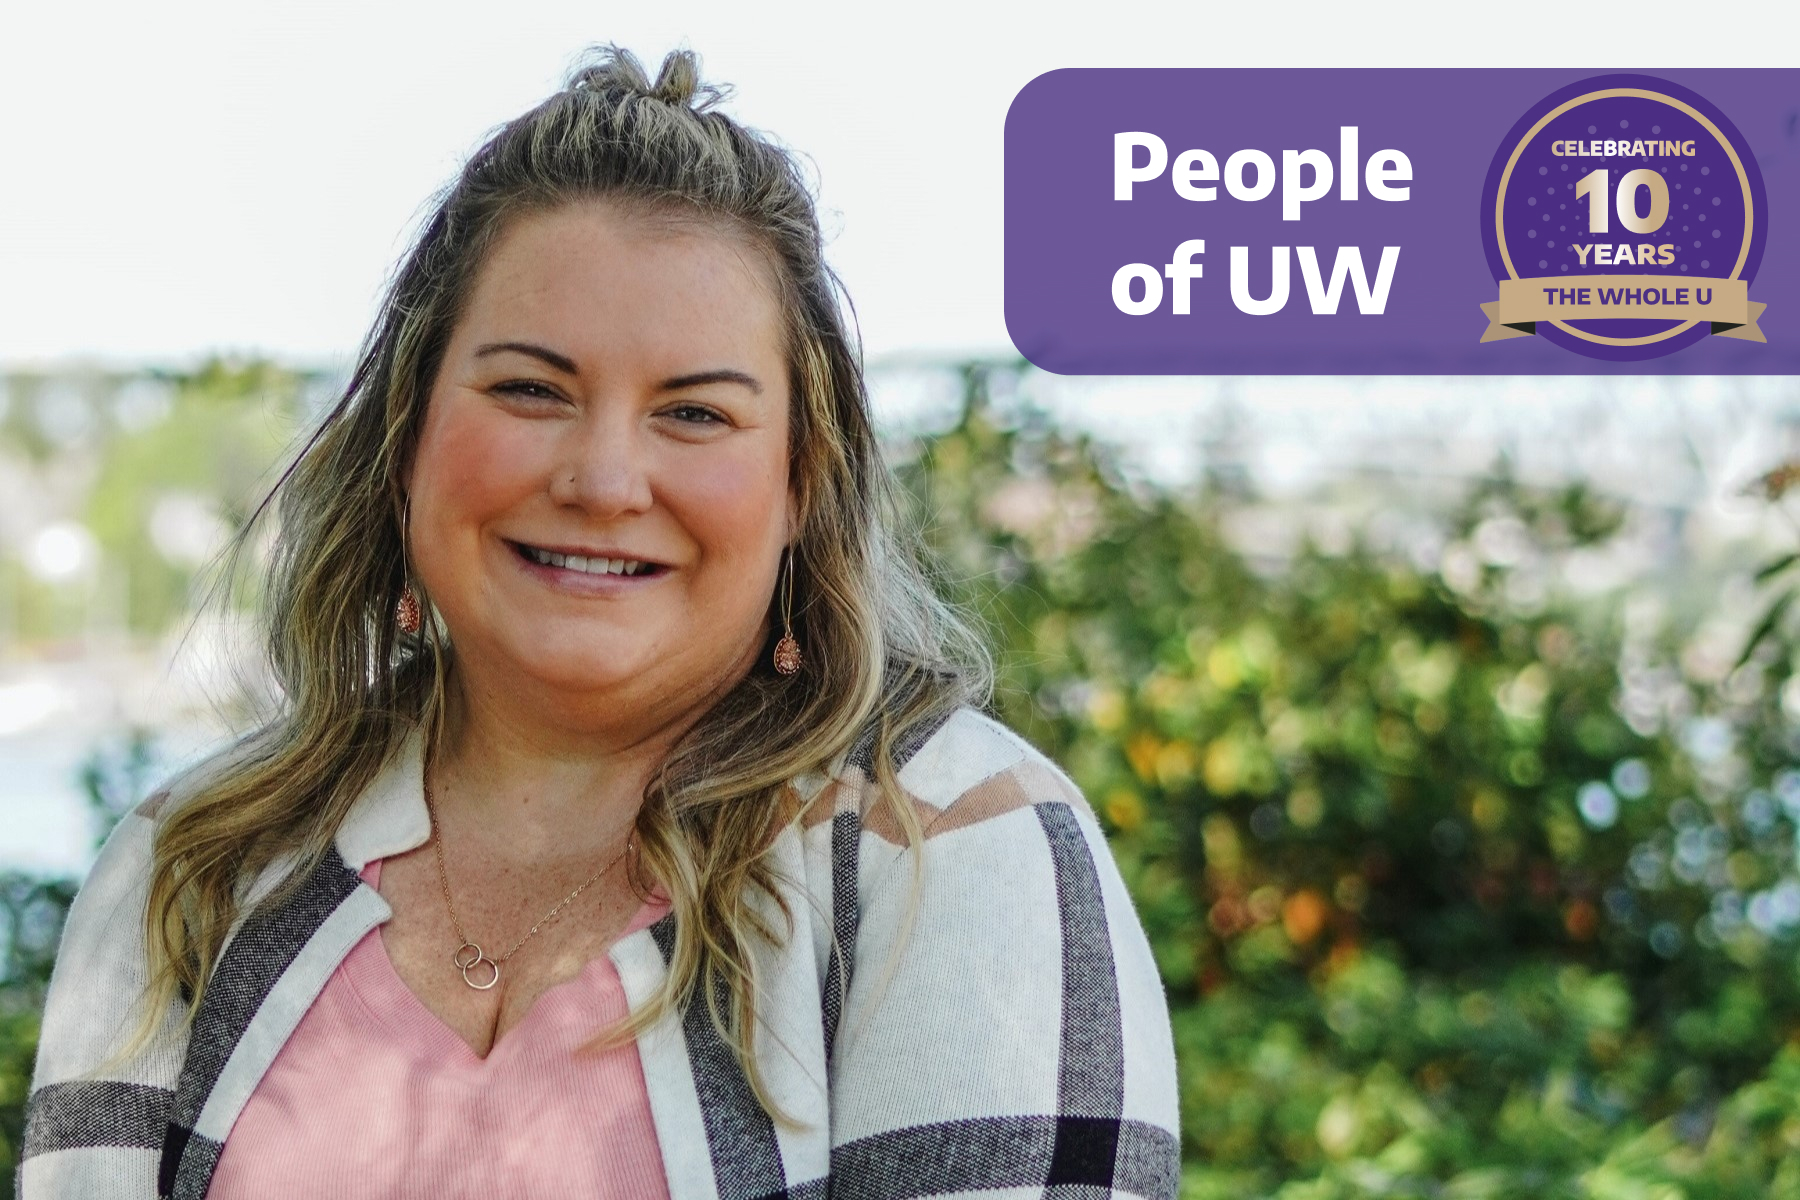 A woman poses outside with the banner "People of UW"